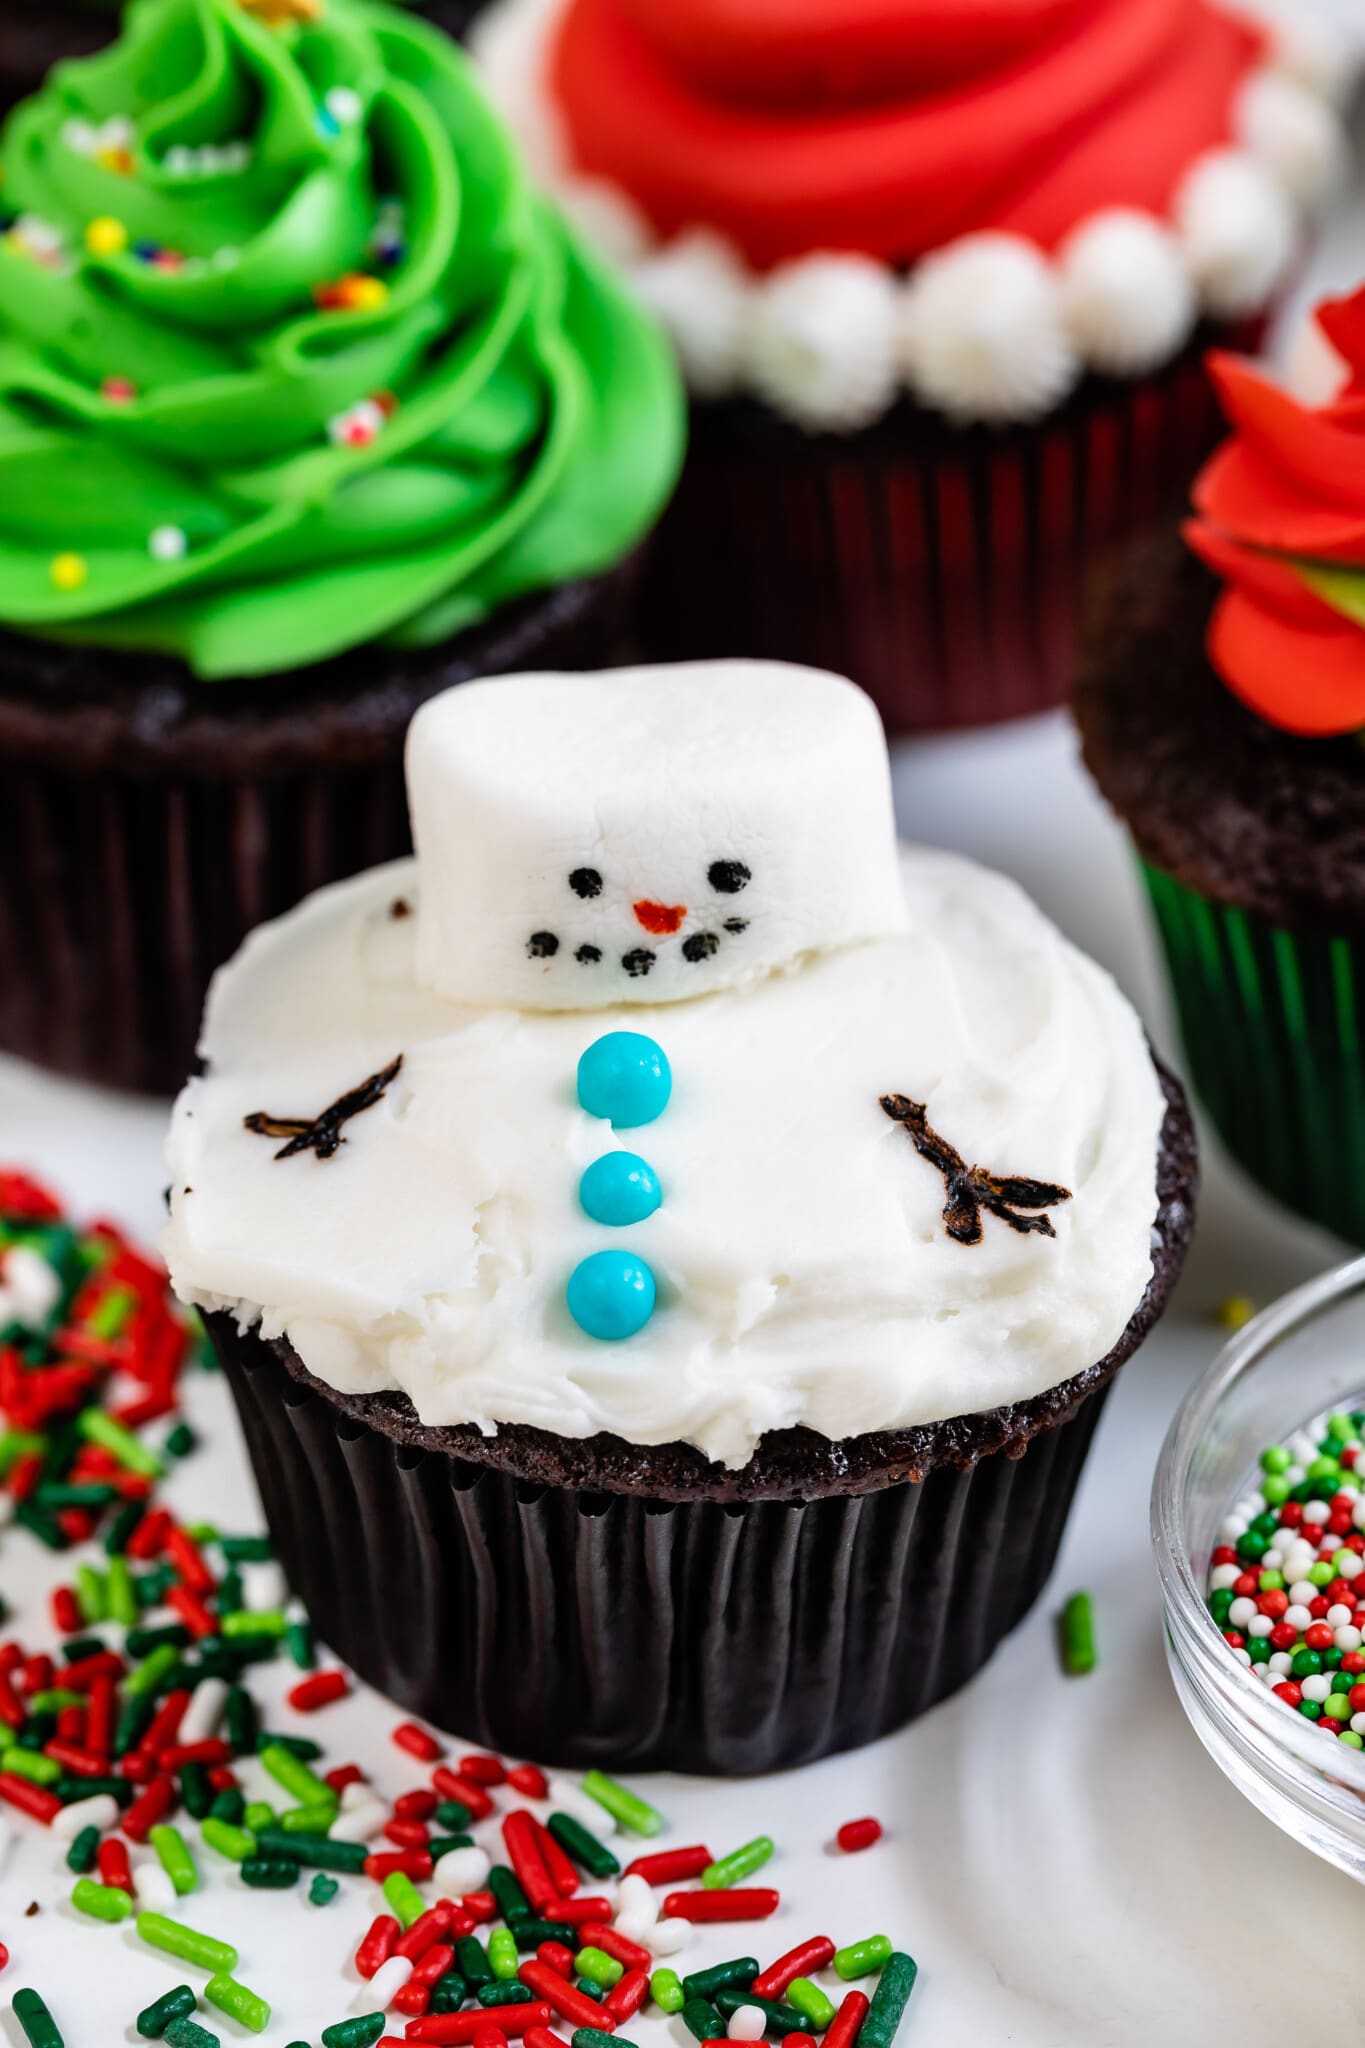 cupcake decorated like a melting snowman